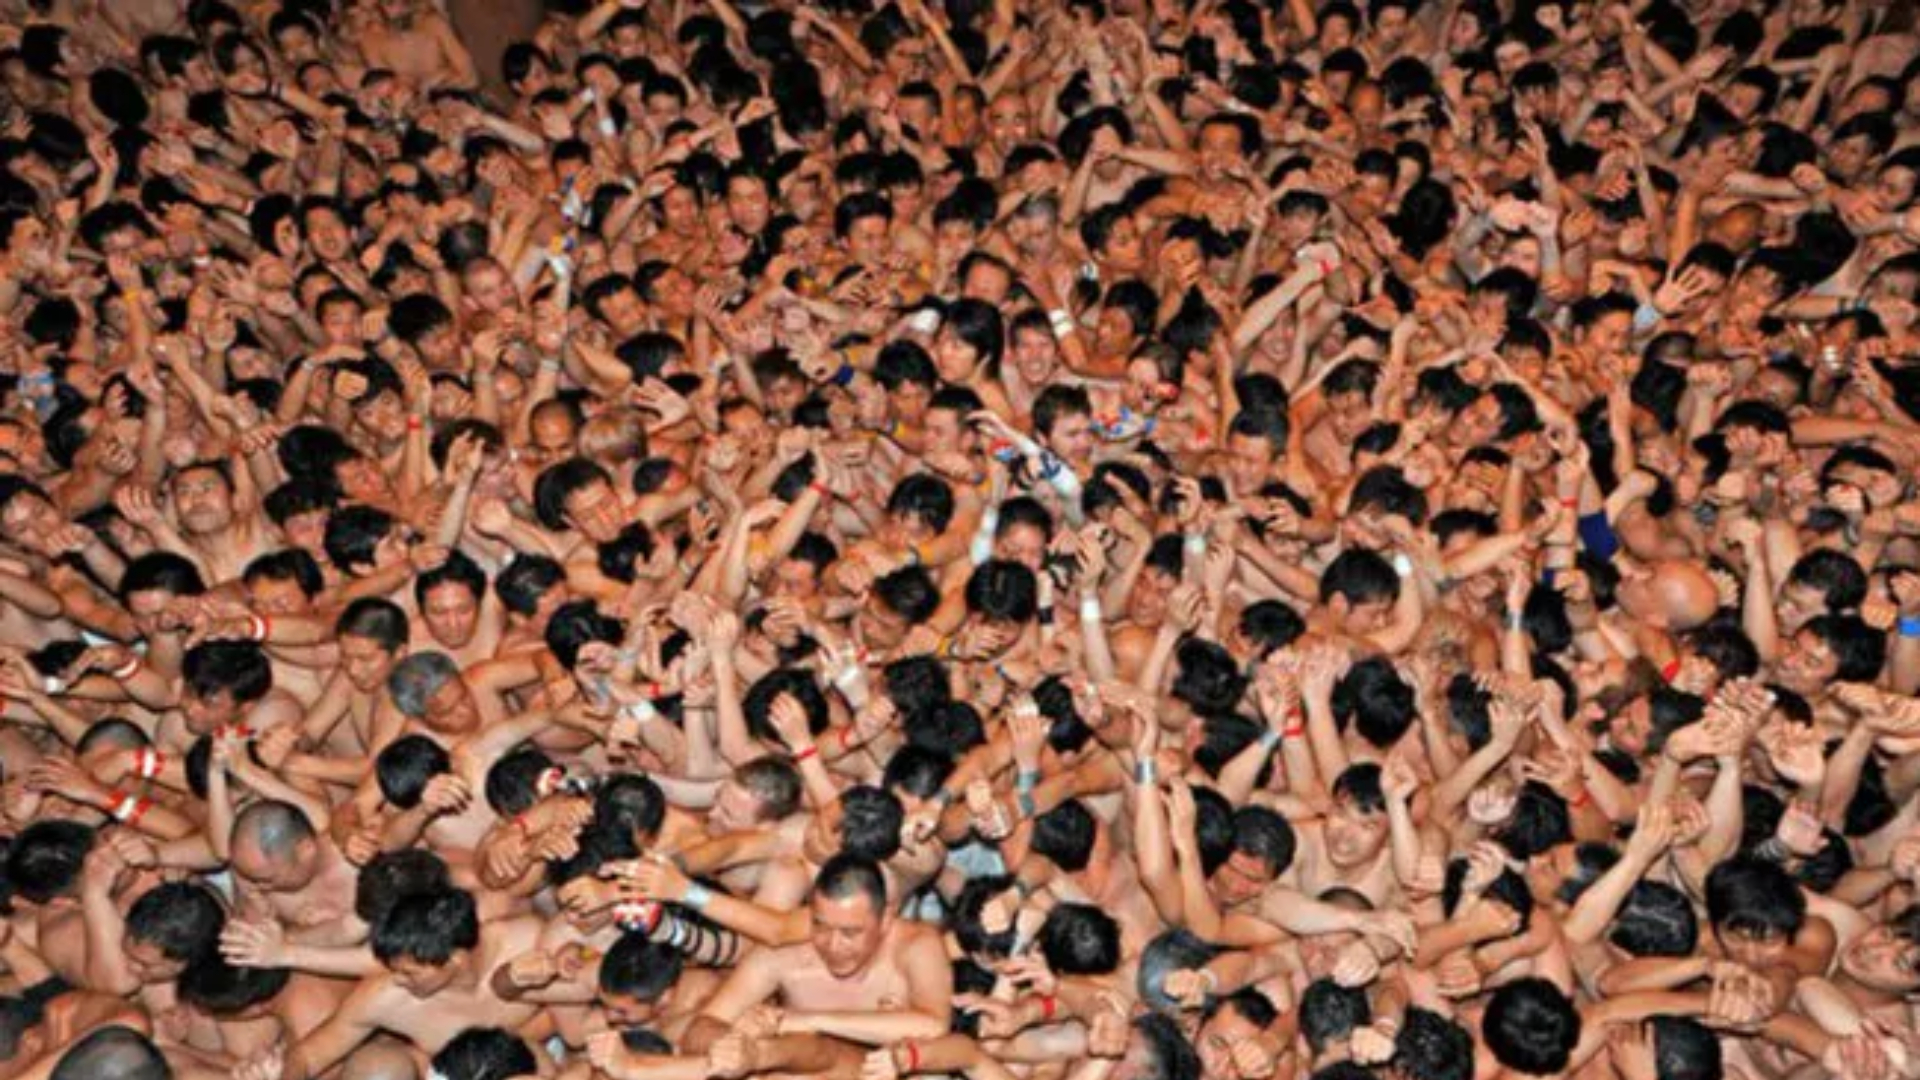 Amid ageing population, Japan's famed 'Naked man' festival held one last time